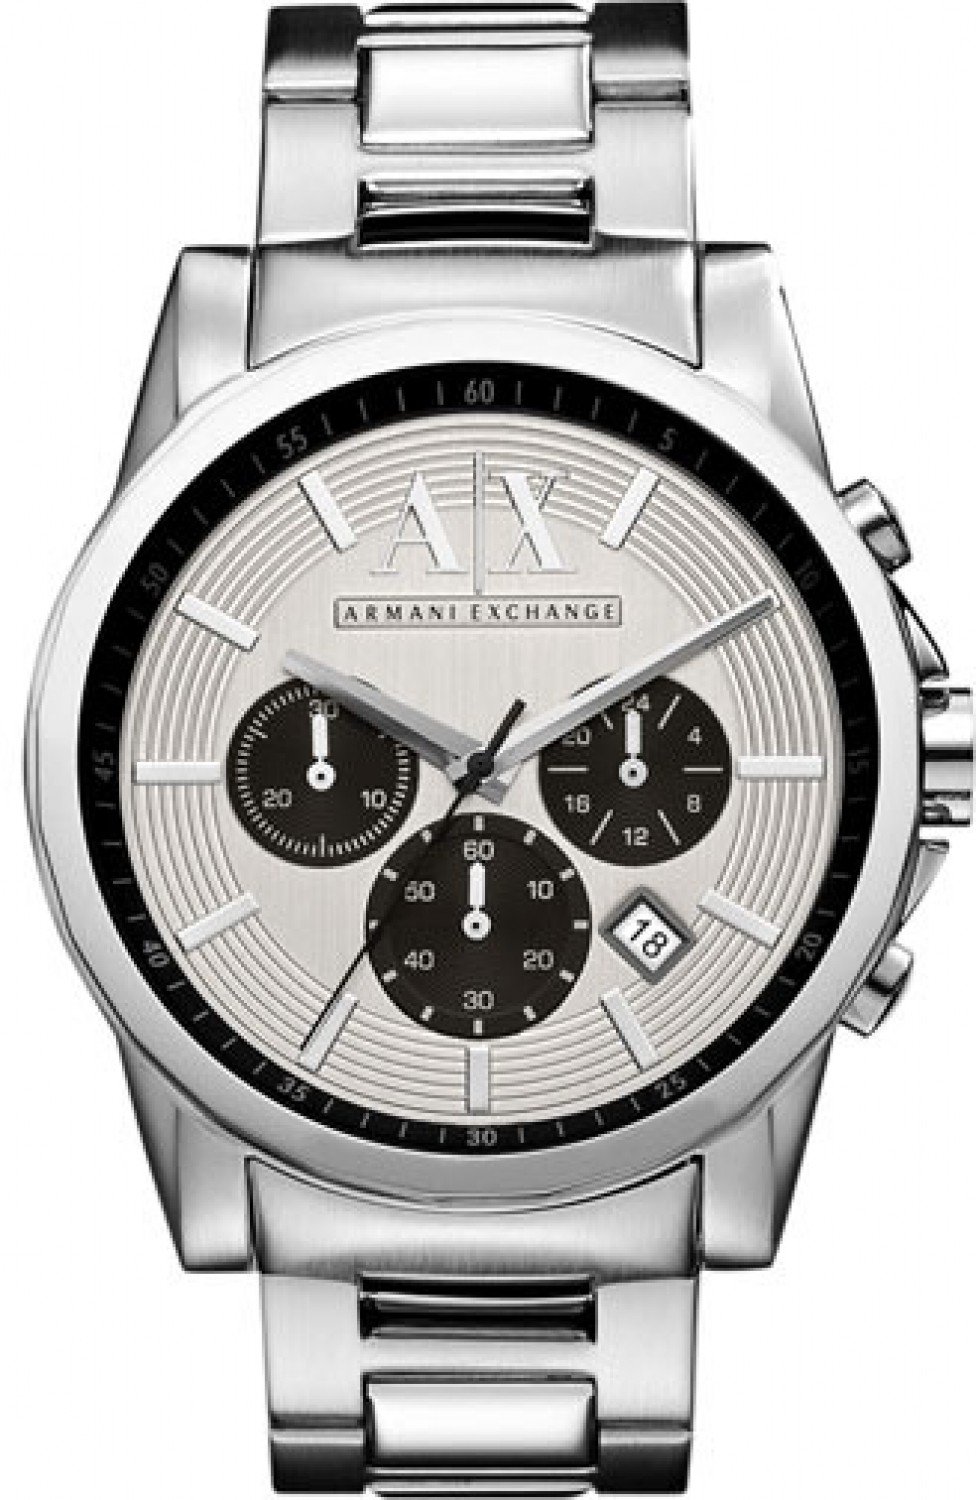 AX Armani Exchange Chronograph Bracelet Watch Silver 45mm ( https://likewatch.com › product-vni-a... ) 